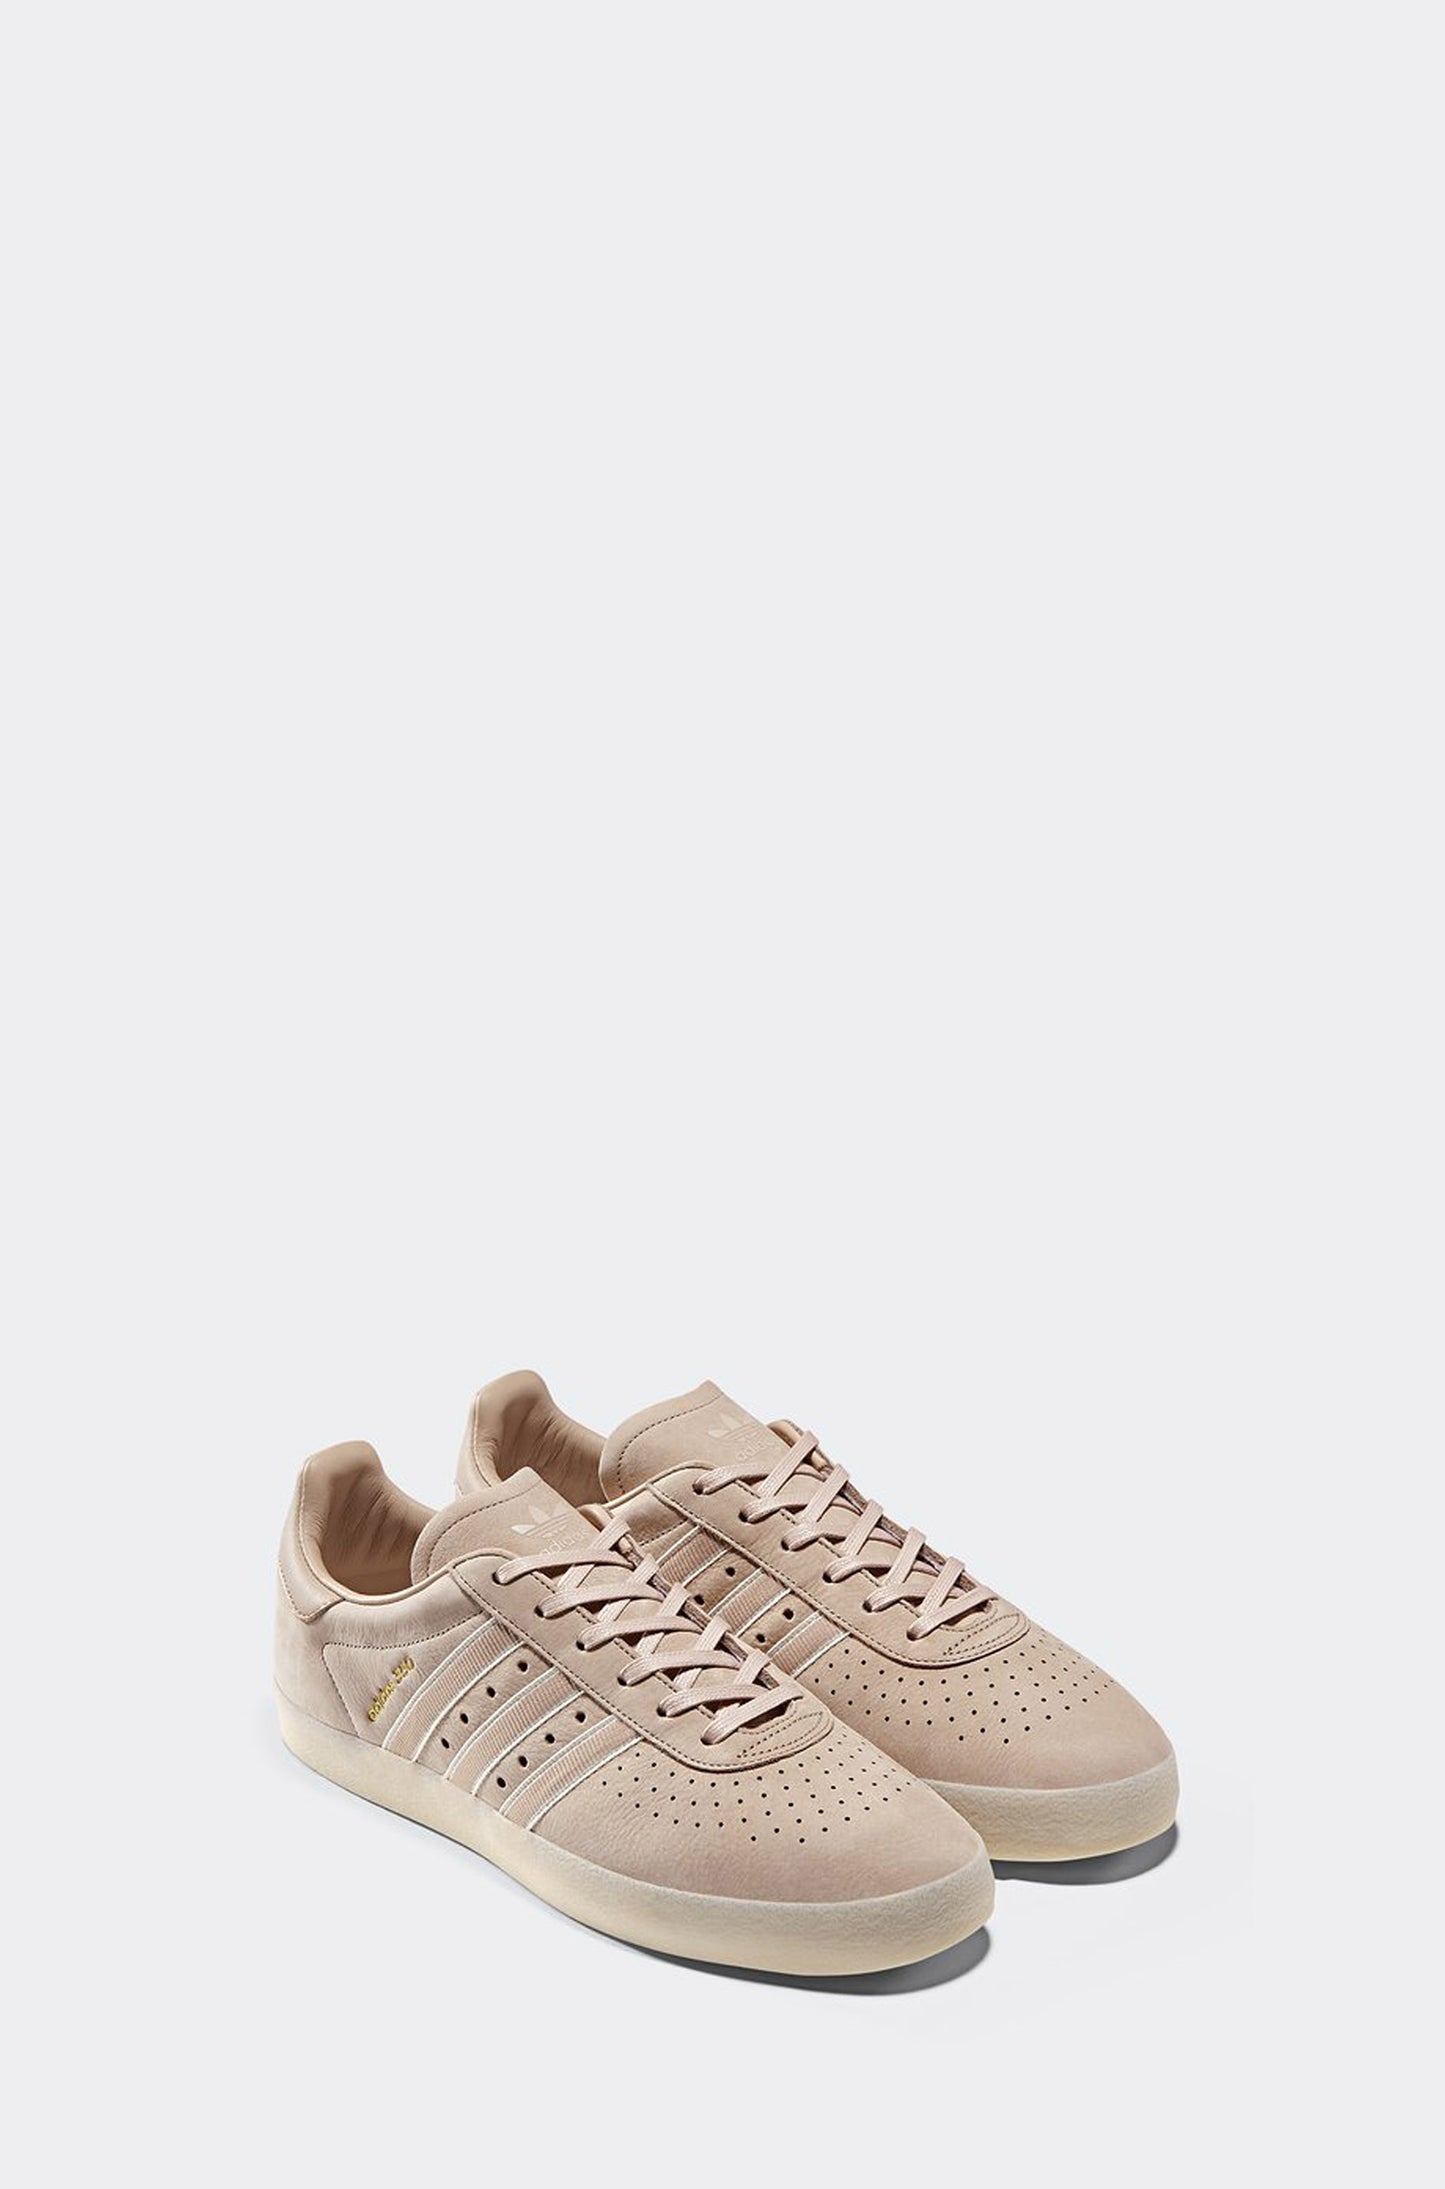 Adidas x Oyster 350 Sneaker (Ash Pearl)